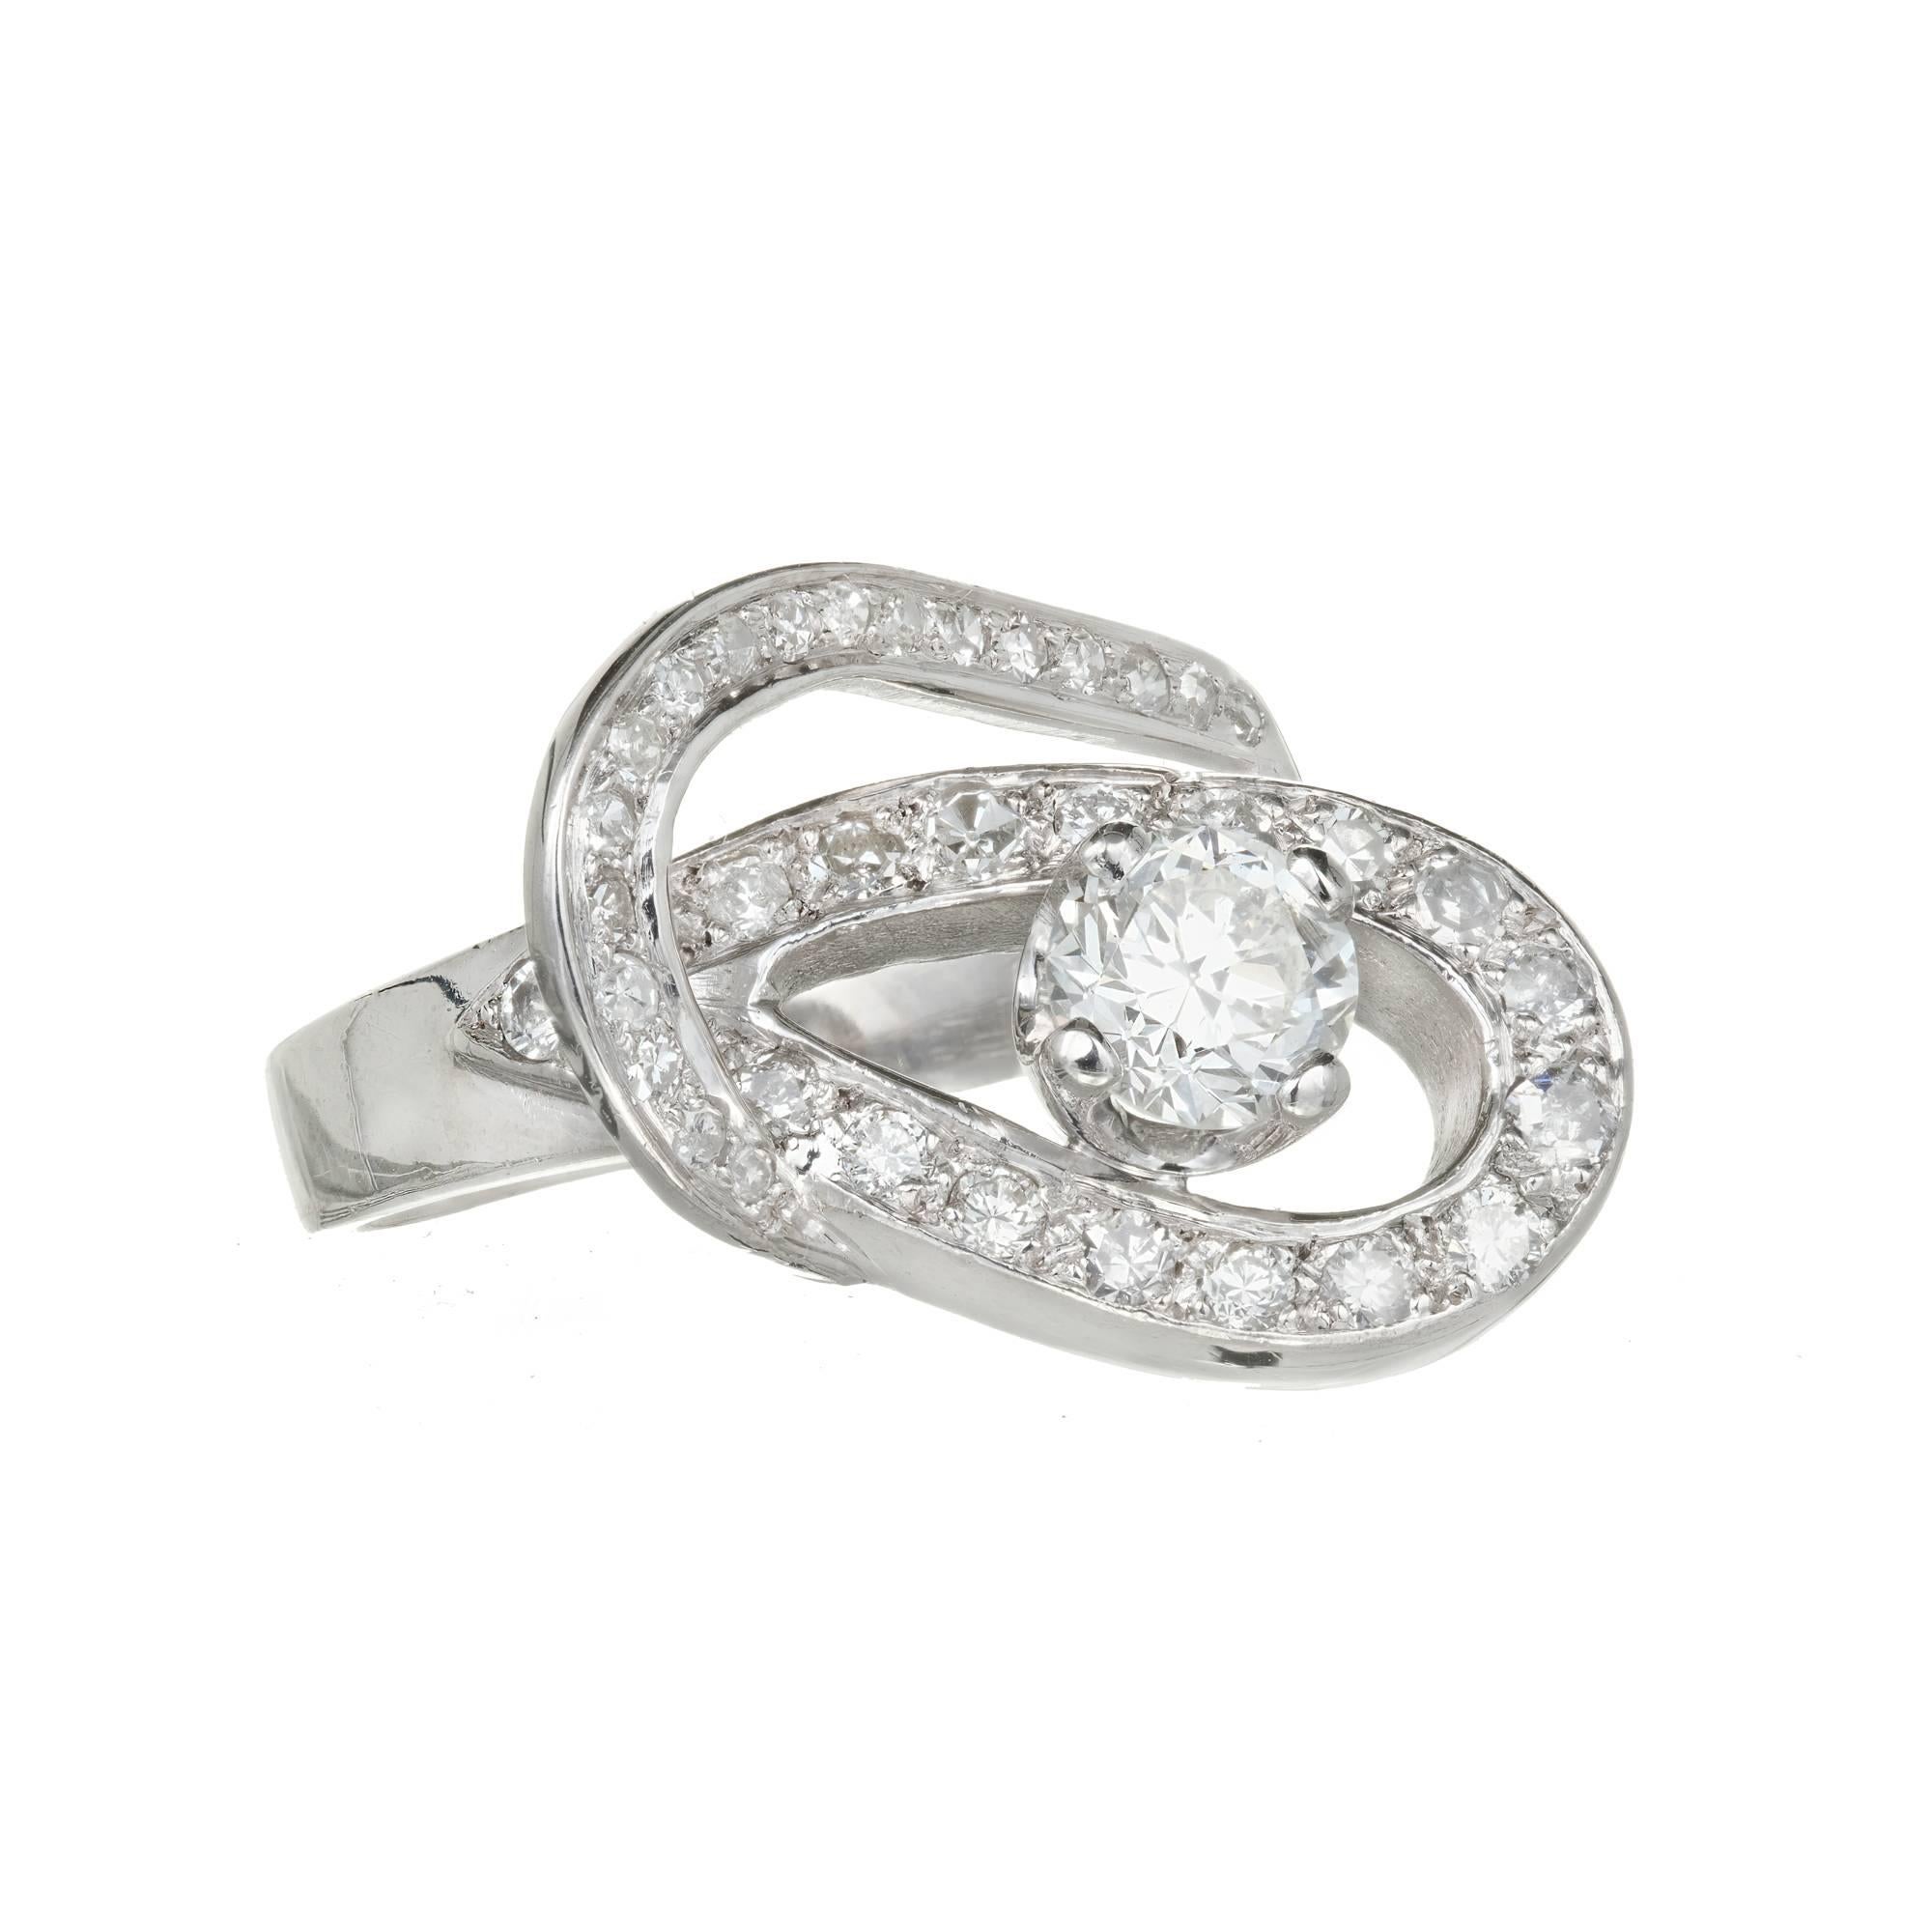 1950's diamond open work double ellipse cocktail ring in a handmade solid Platinum with a transitional cut bright white main stone and Diamond accents.

1 transitional brilliant cut Diamond, approx. total weight .80cts, F – G, SI3, EGL certificate #